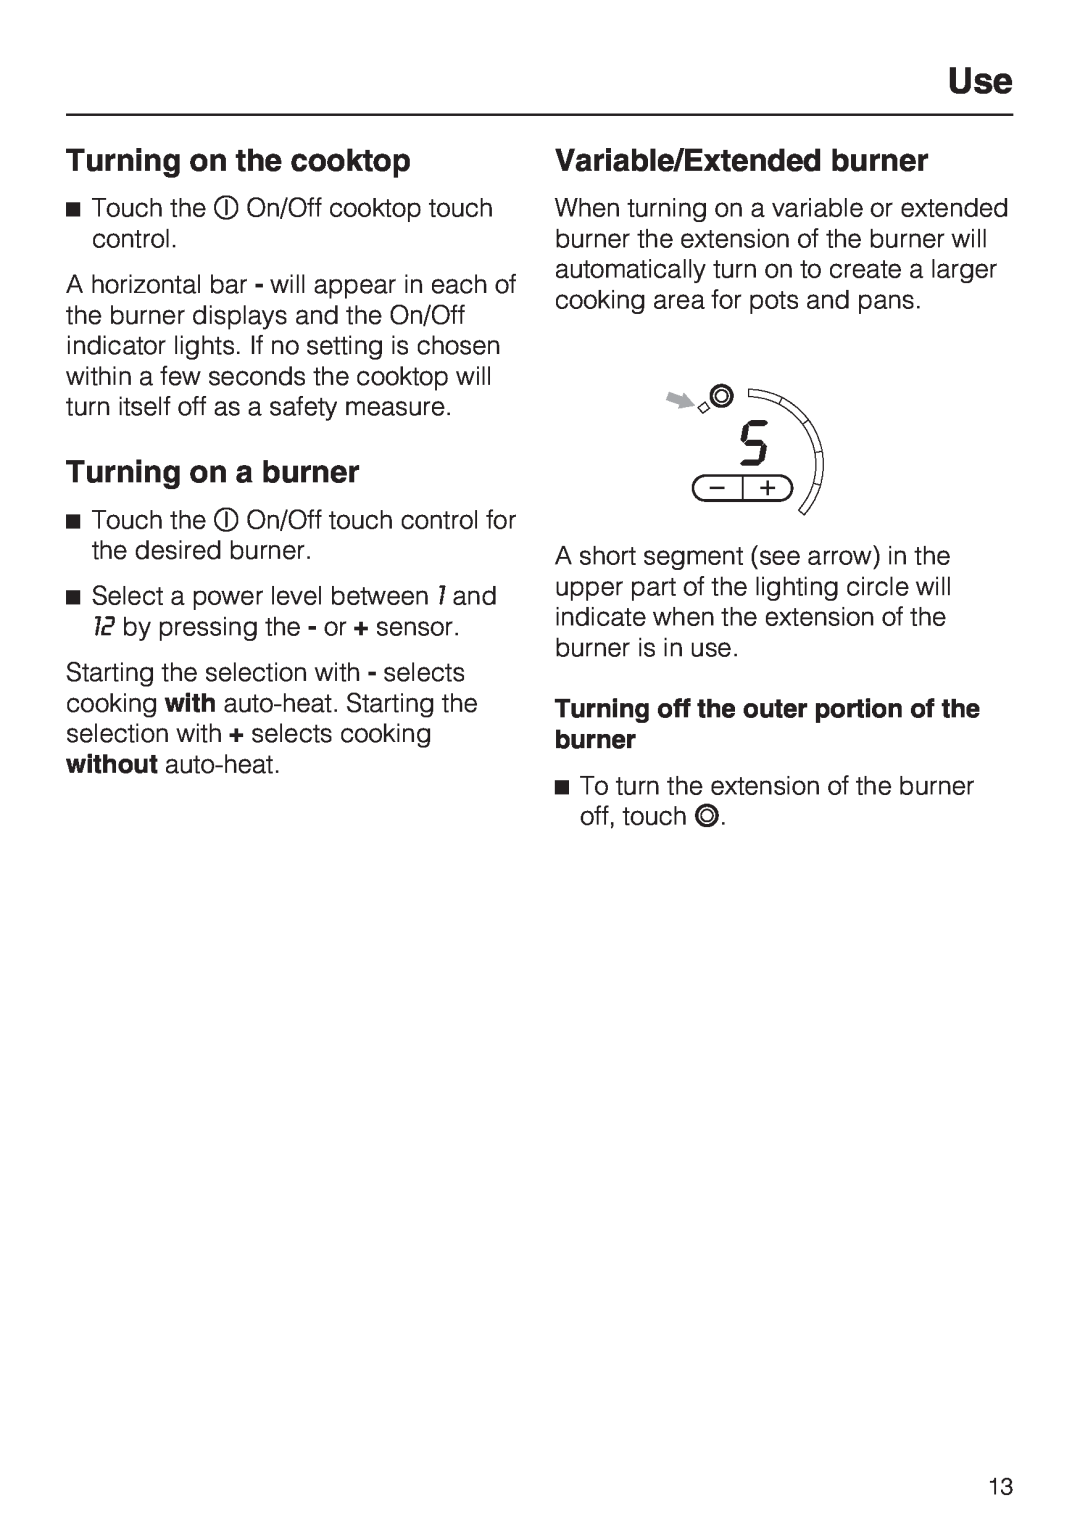 Miele KM5676 installation instructions Turning on the cooktop, Turning on a burner, Variable/Extended burner 